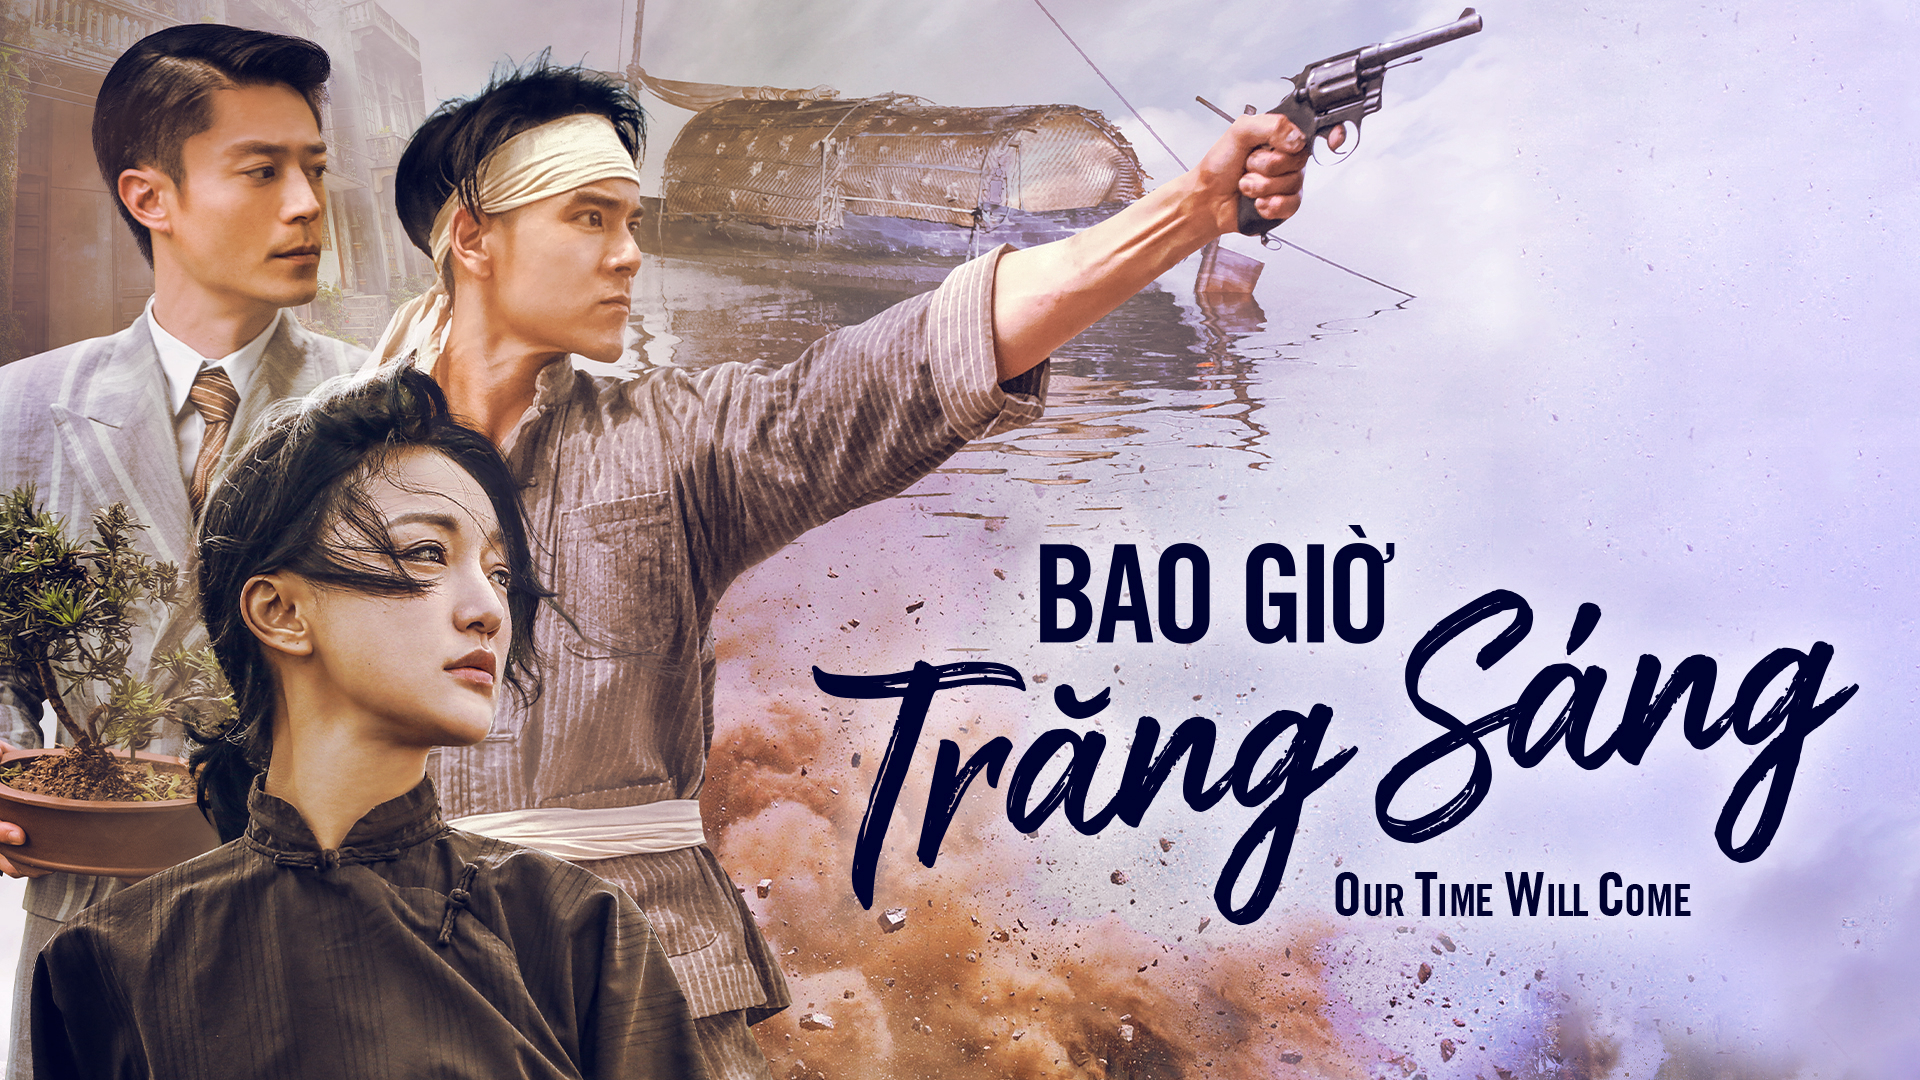 Poster Phim Bao Giờ Trăng Sáng (Our Time Will Come)